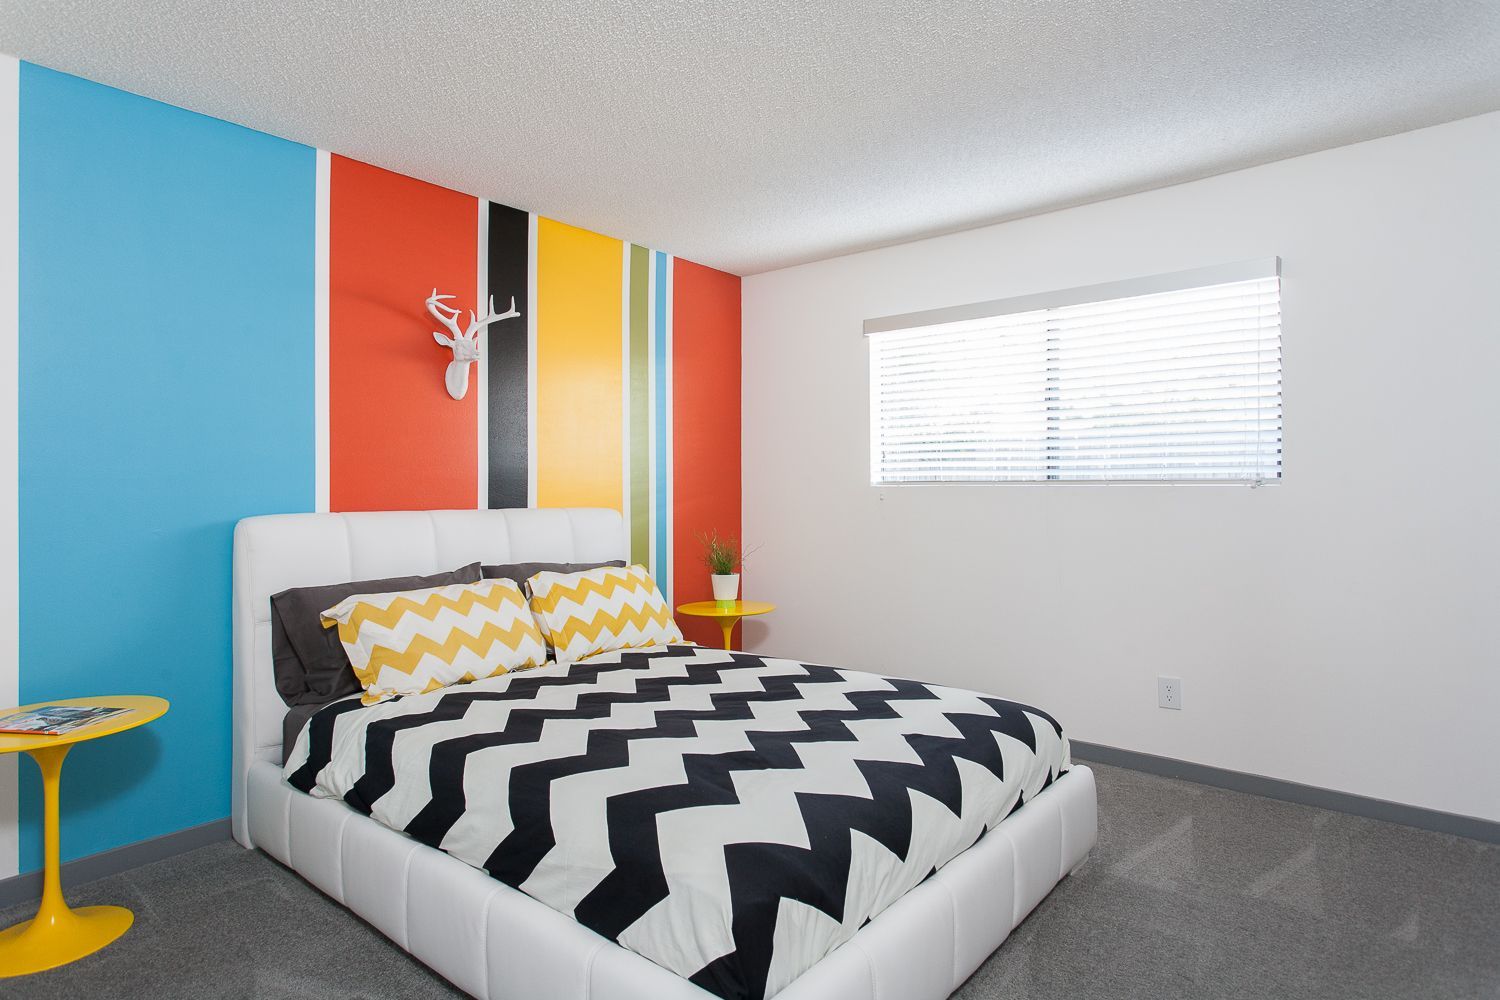 Sliding Photo Gallery Displaying Apartment Features - Bedroom